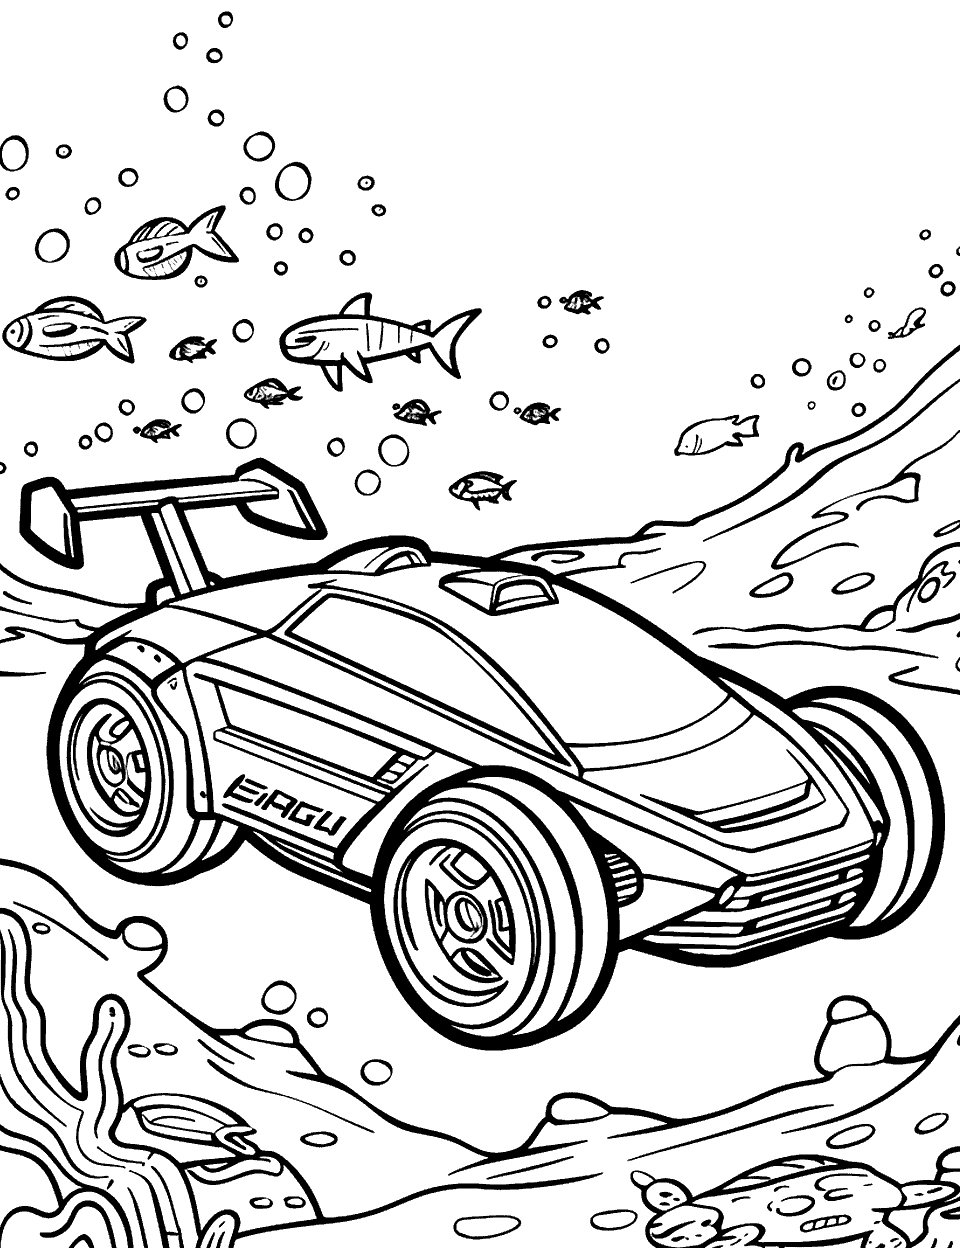 Underwater Racing Adventure Coloring Page - A Hot Wheels car with a scuba theme racing through an underwater course.